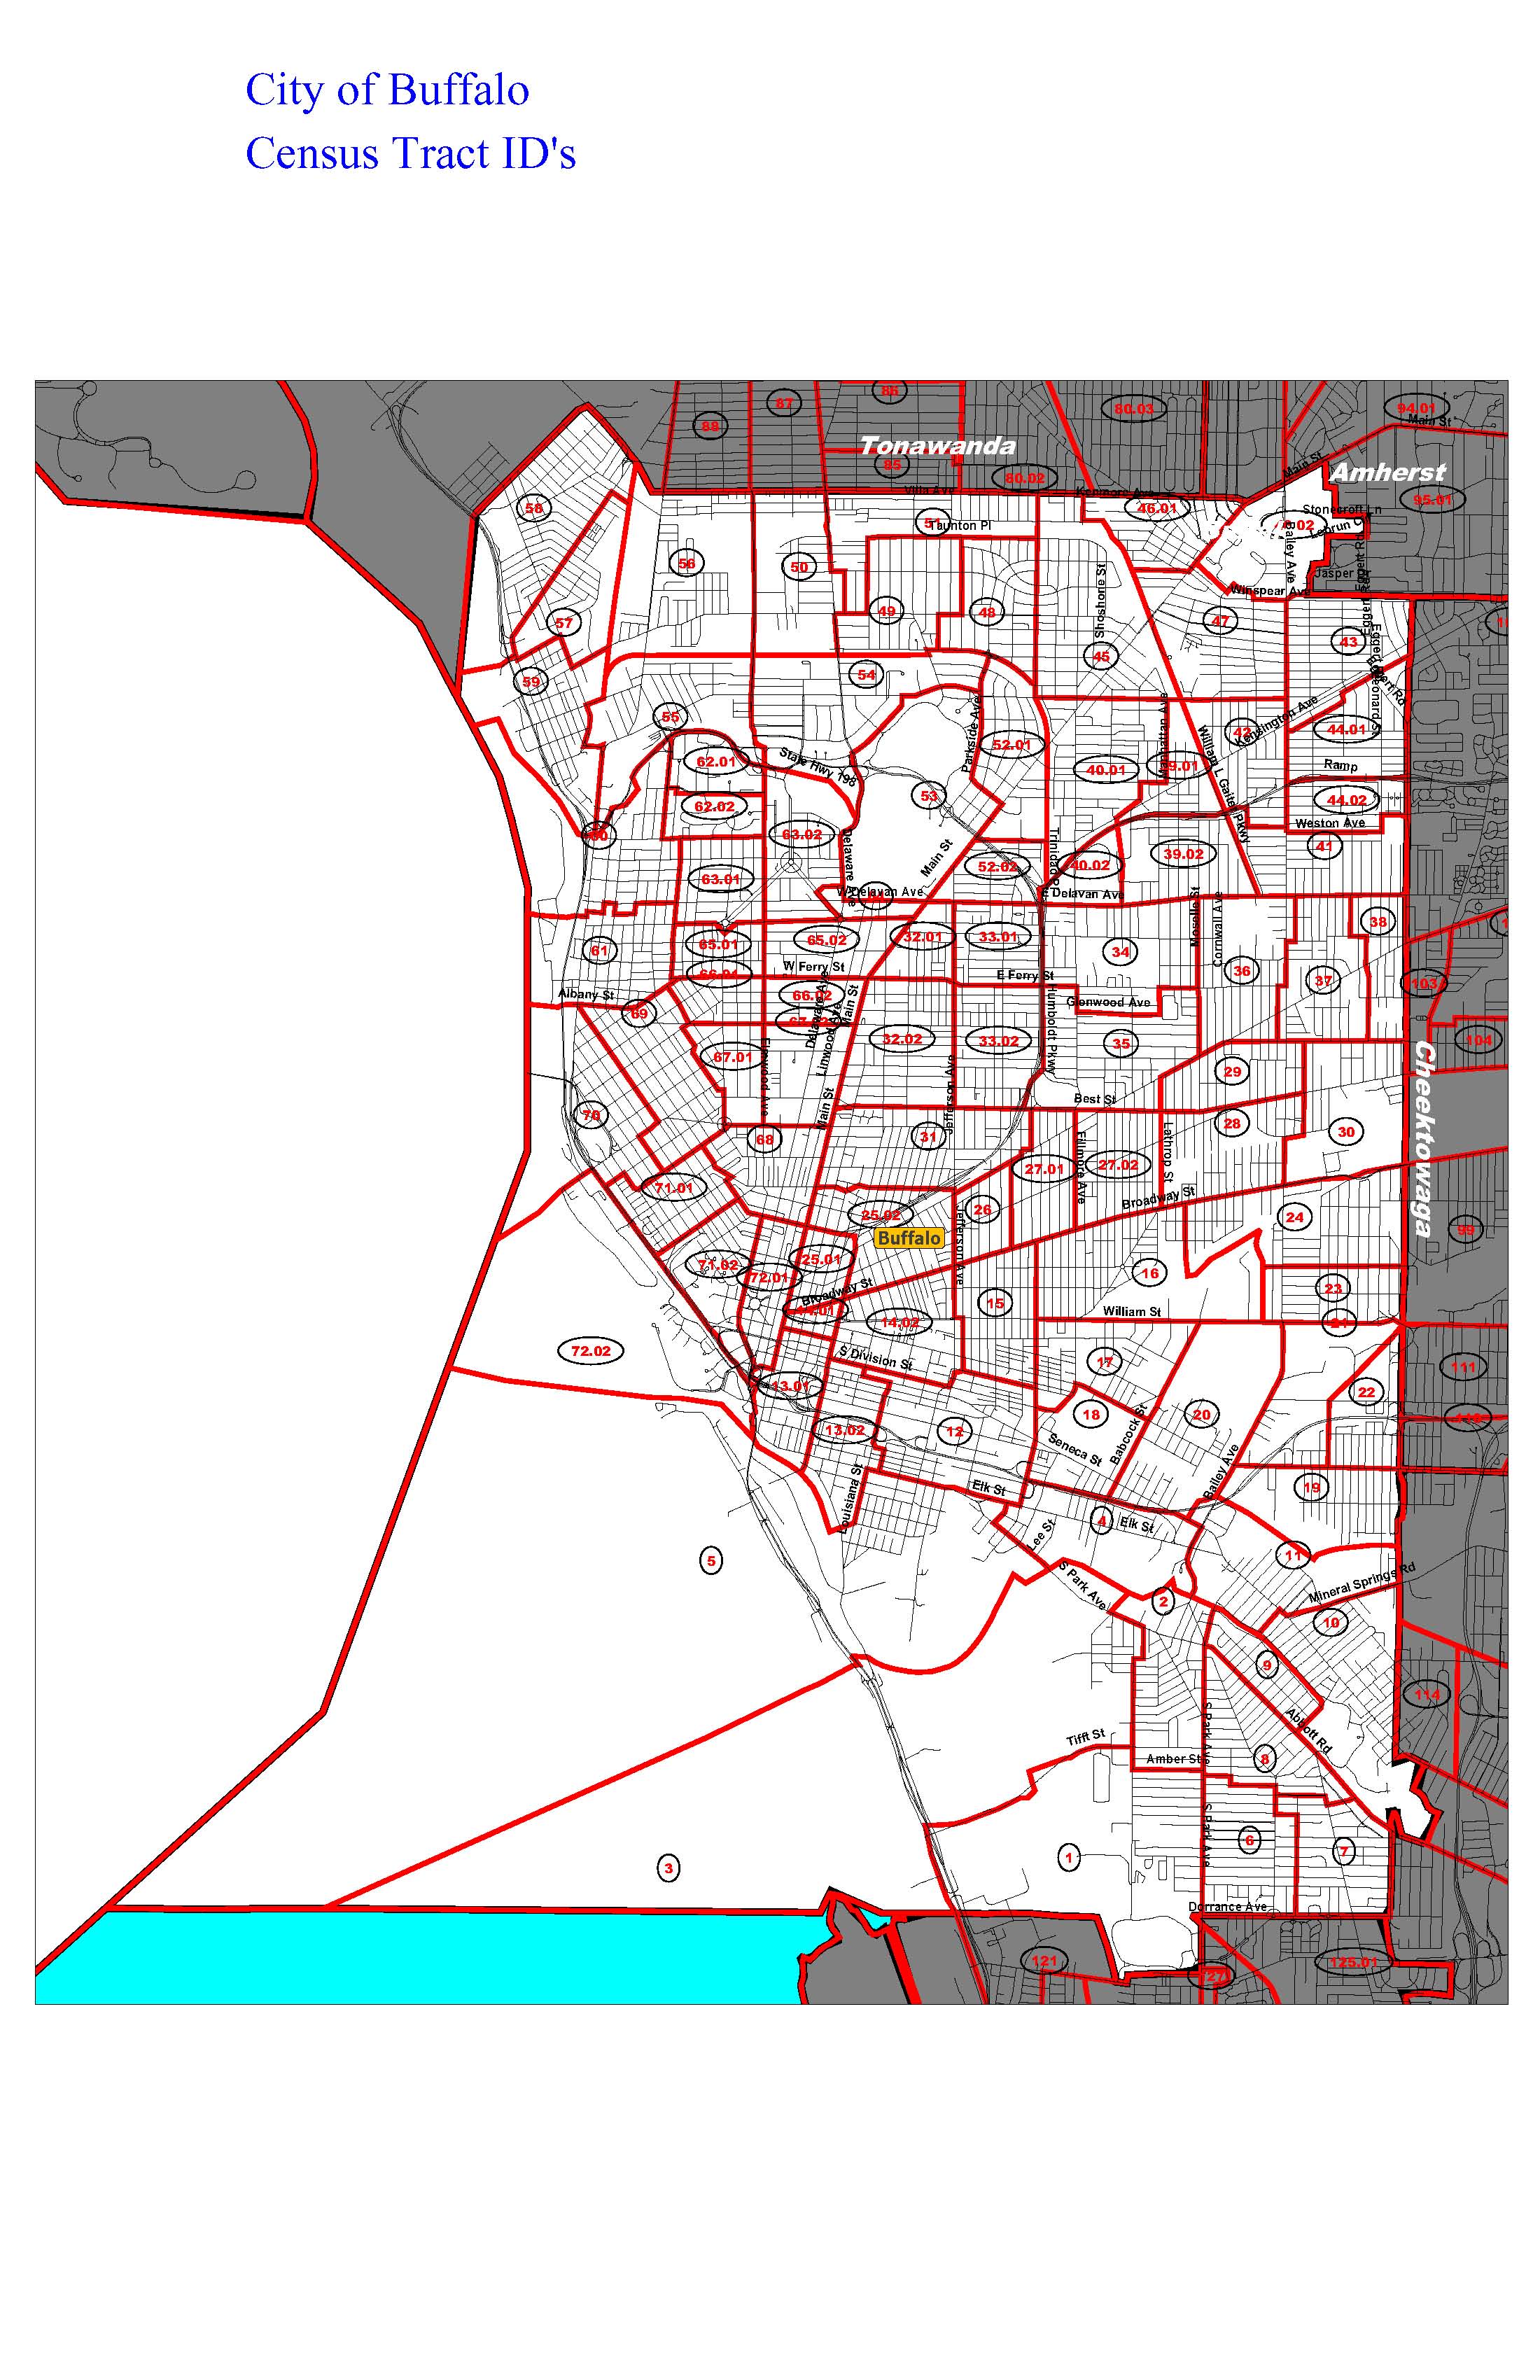 Map of City of Buffalo indicating Census Tracts Erie County Legislature